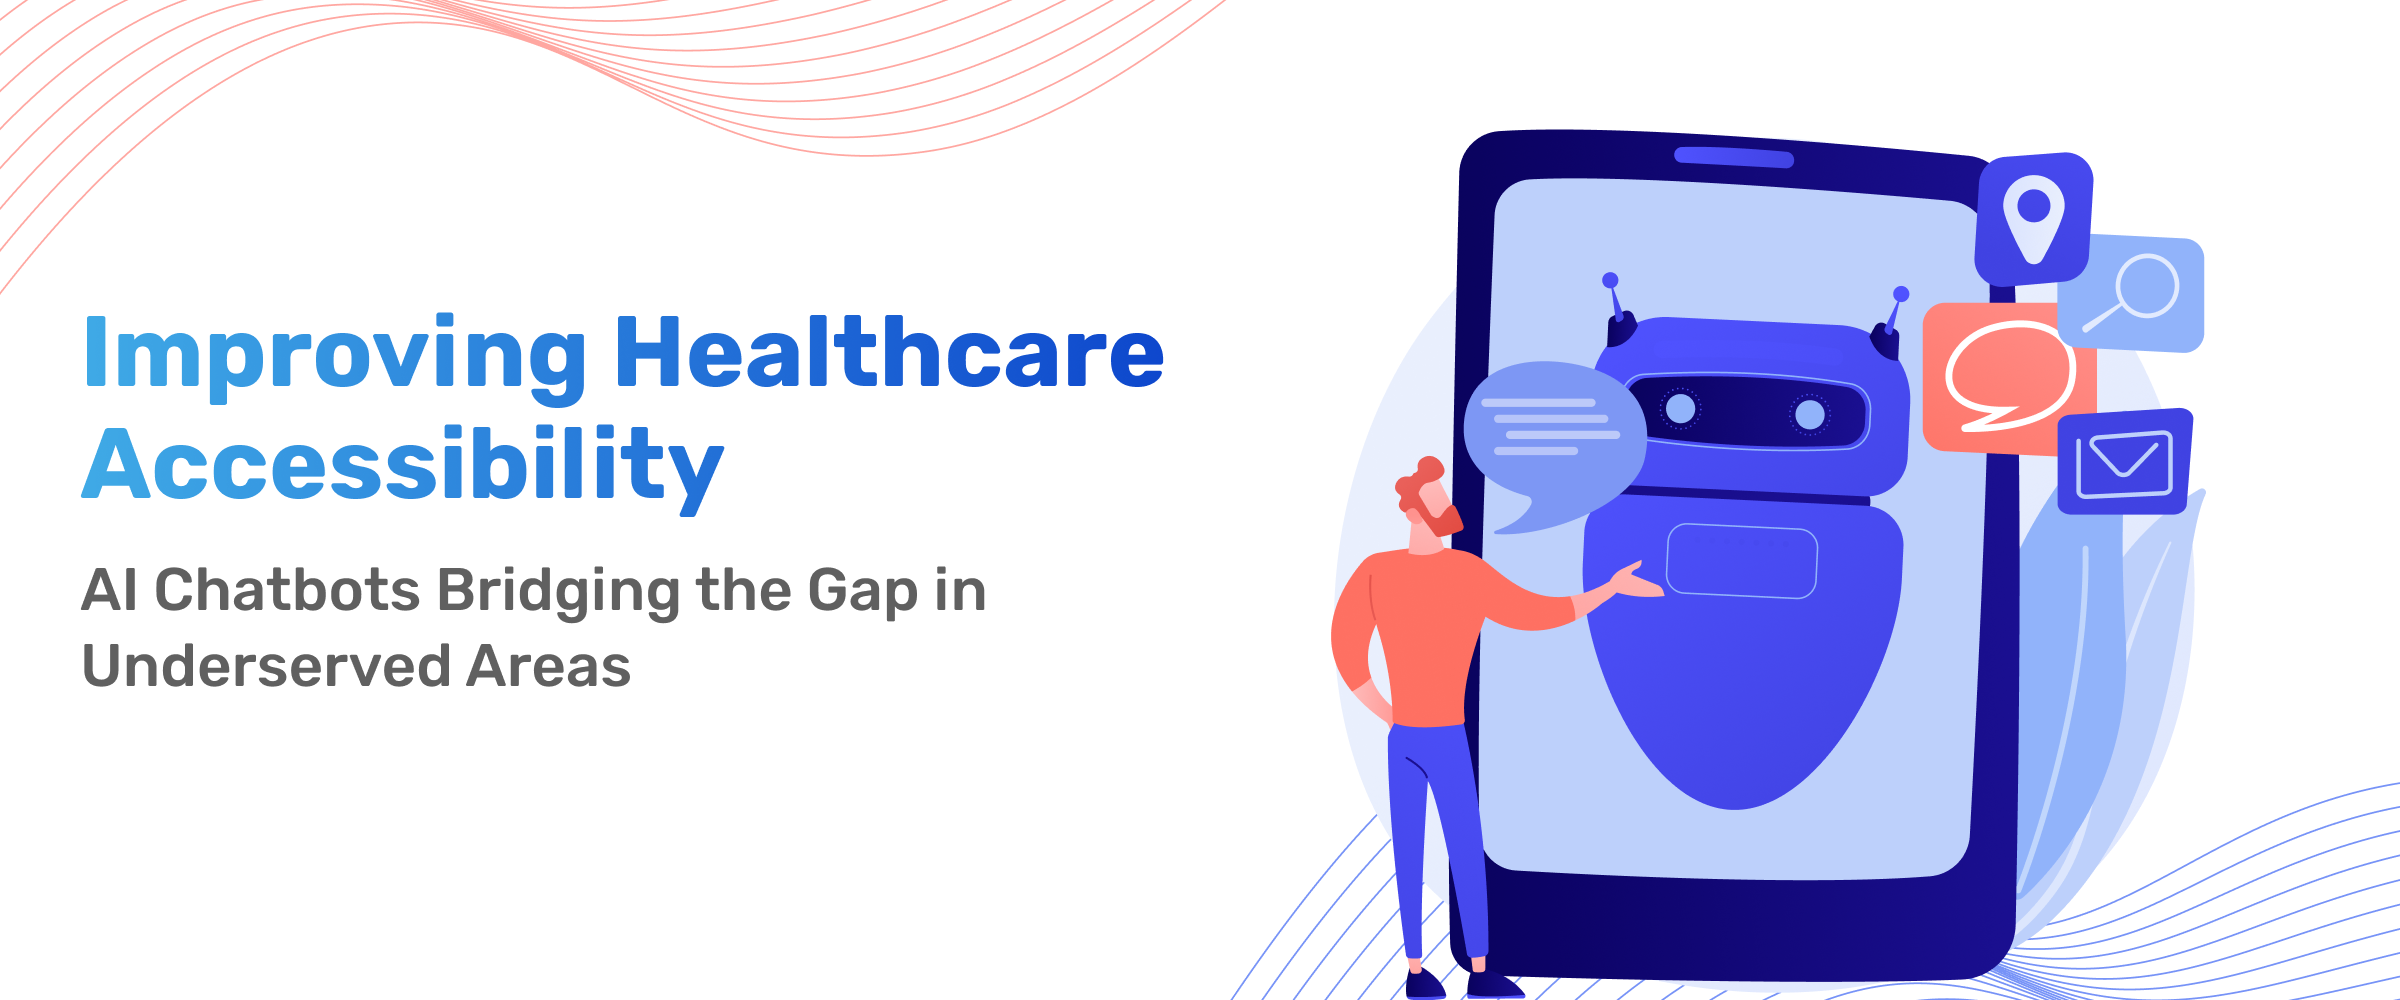 Improving Healthcare Accessibility - AI Chatbots Bridging the Gap in Underserved Areas banner image